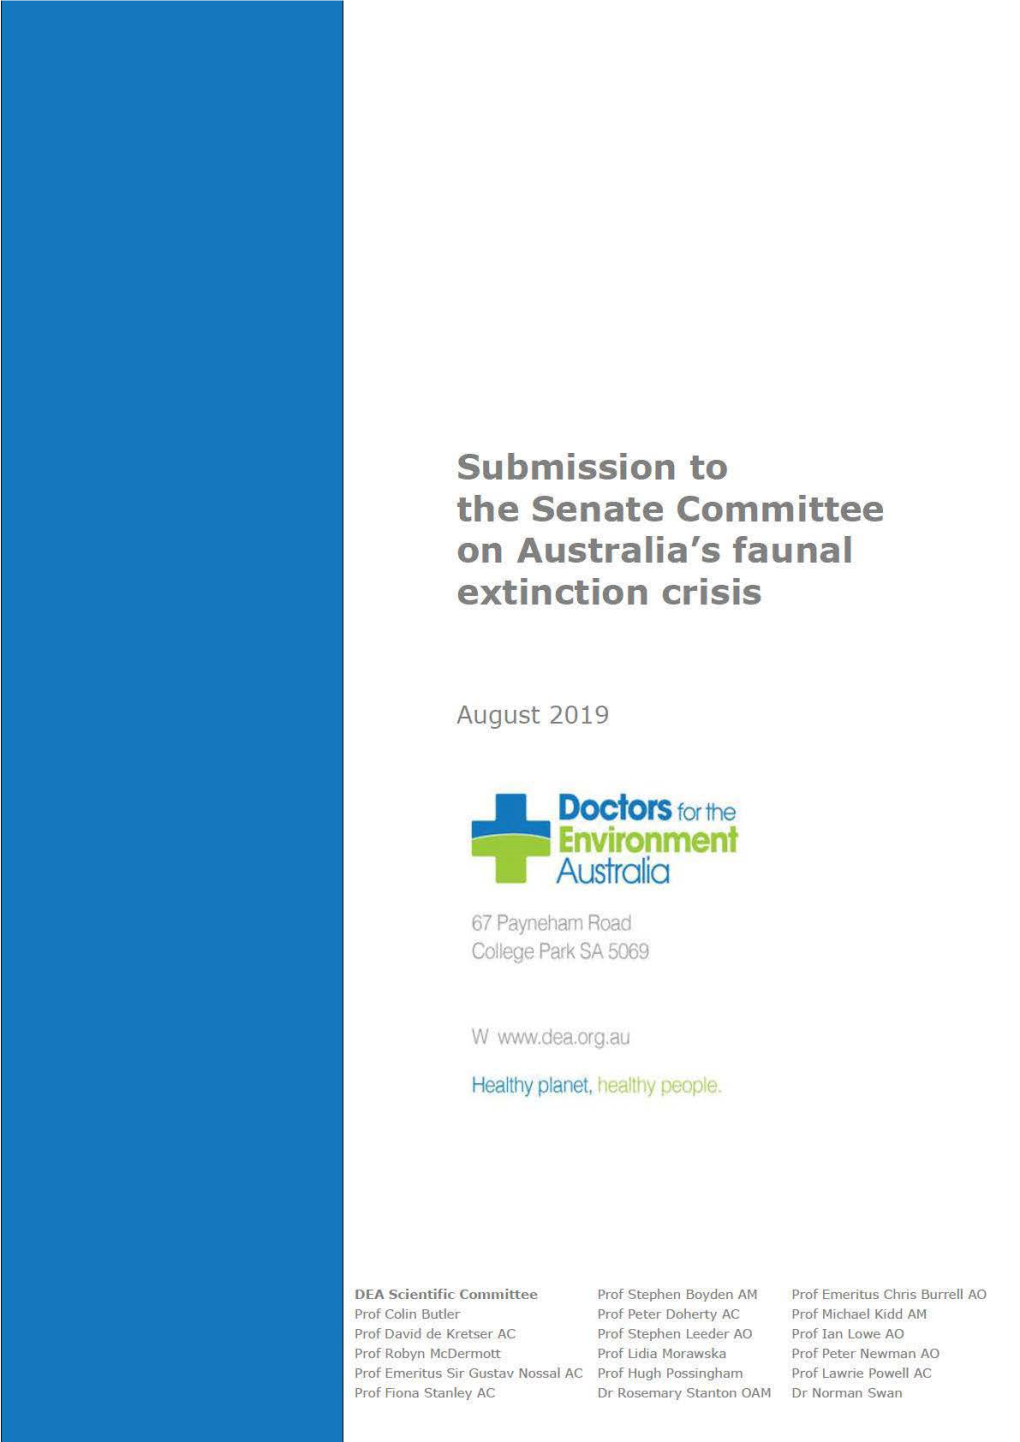 Submission to the Senate Committee on Australia's Faunal Extinction Crisis